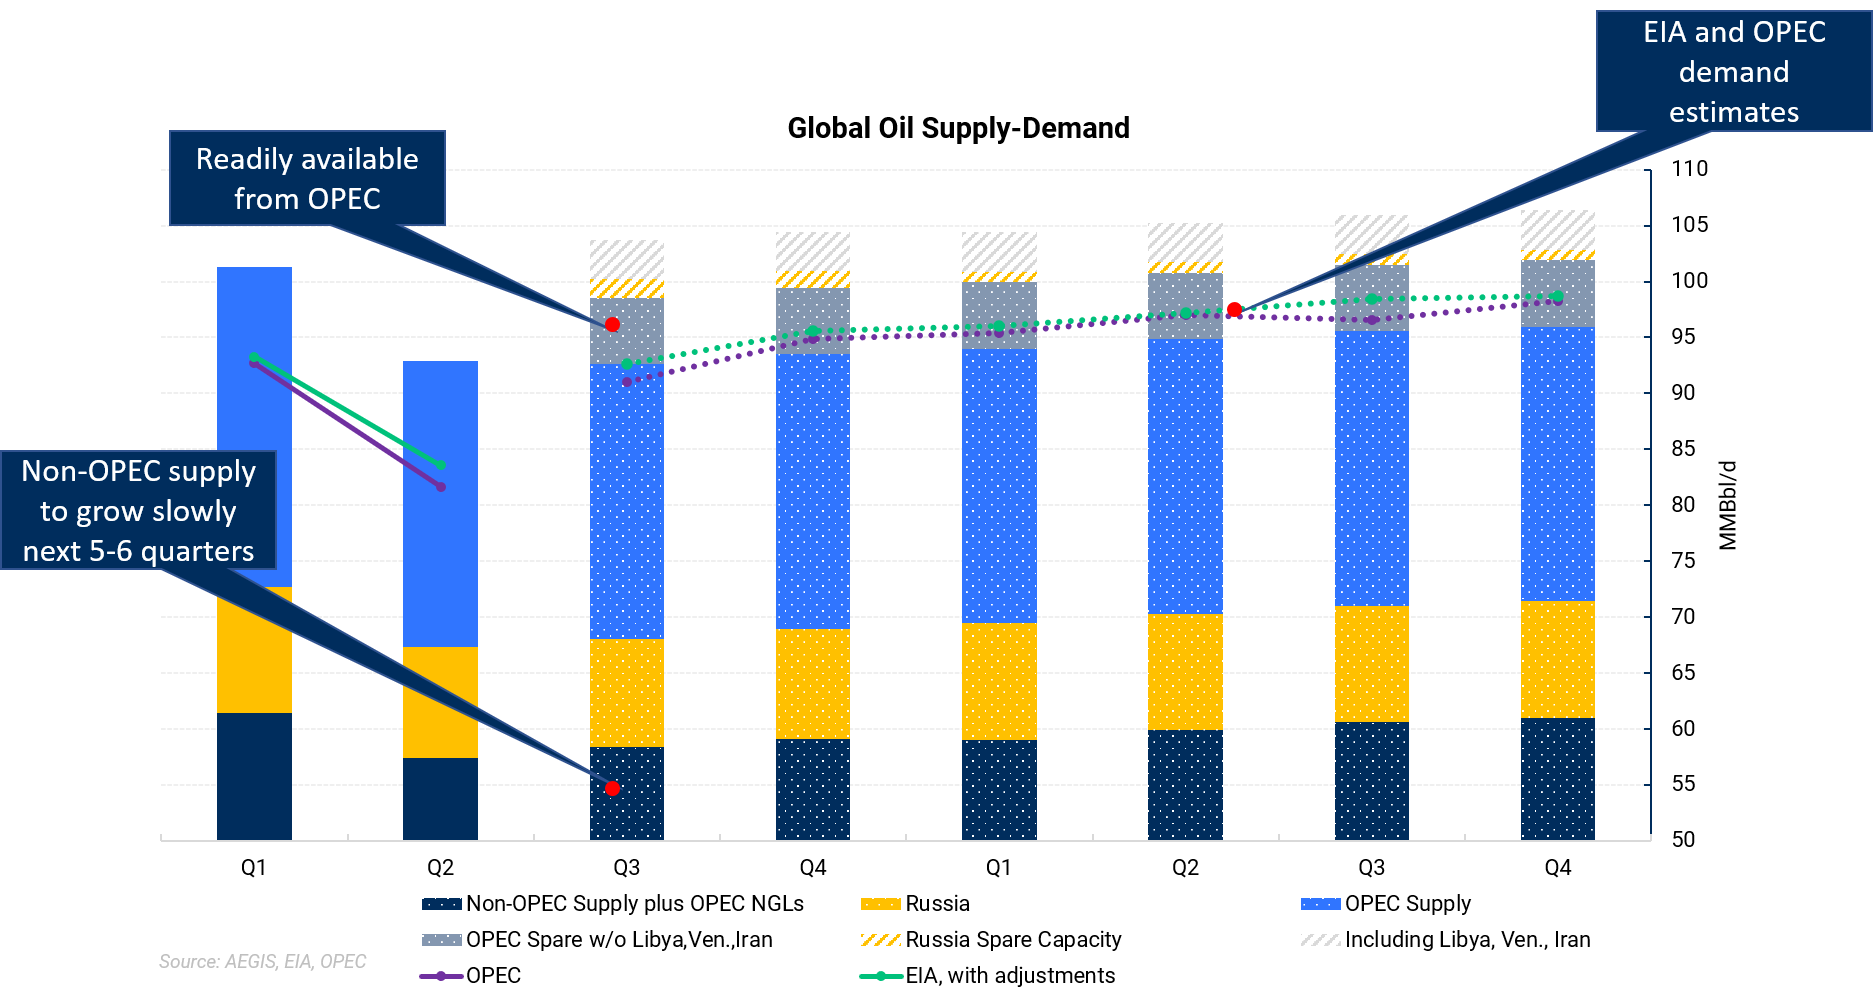 Global Oil Supply and Demand